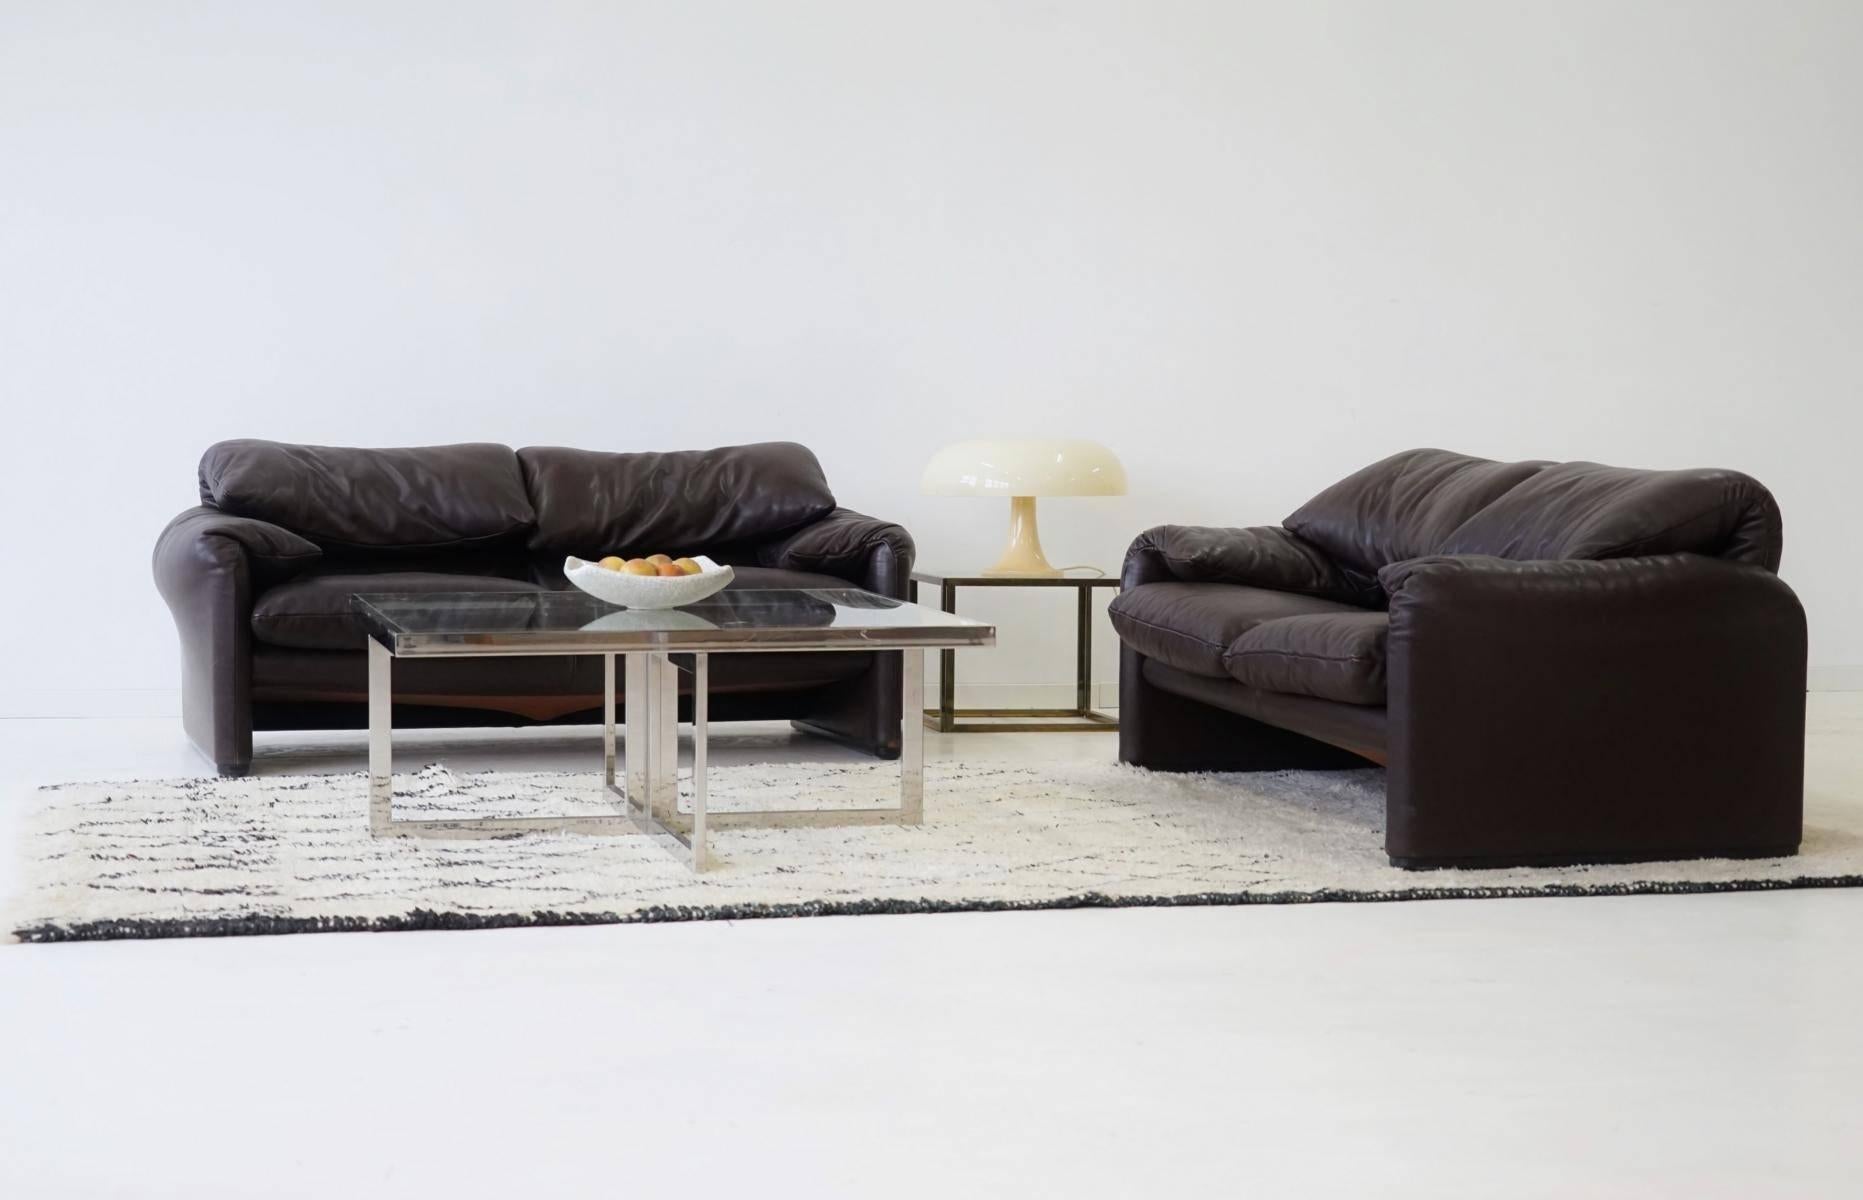 Set of two two-seat Maralunga Cassina Vico Magestretti design function canapé couch
